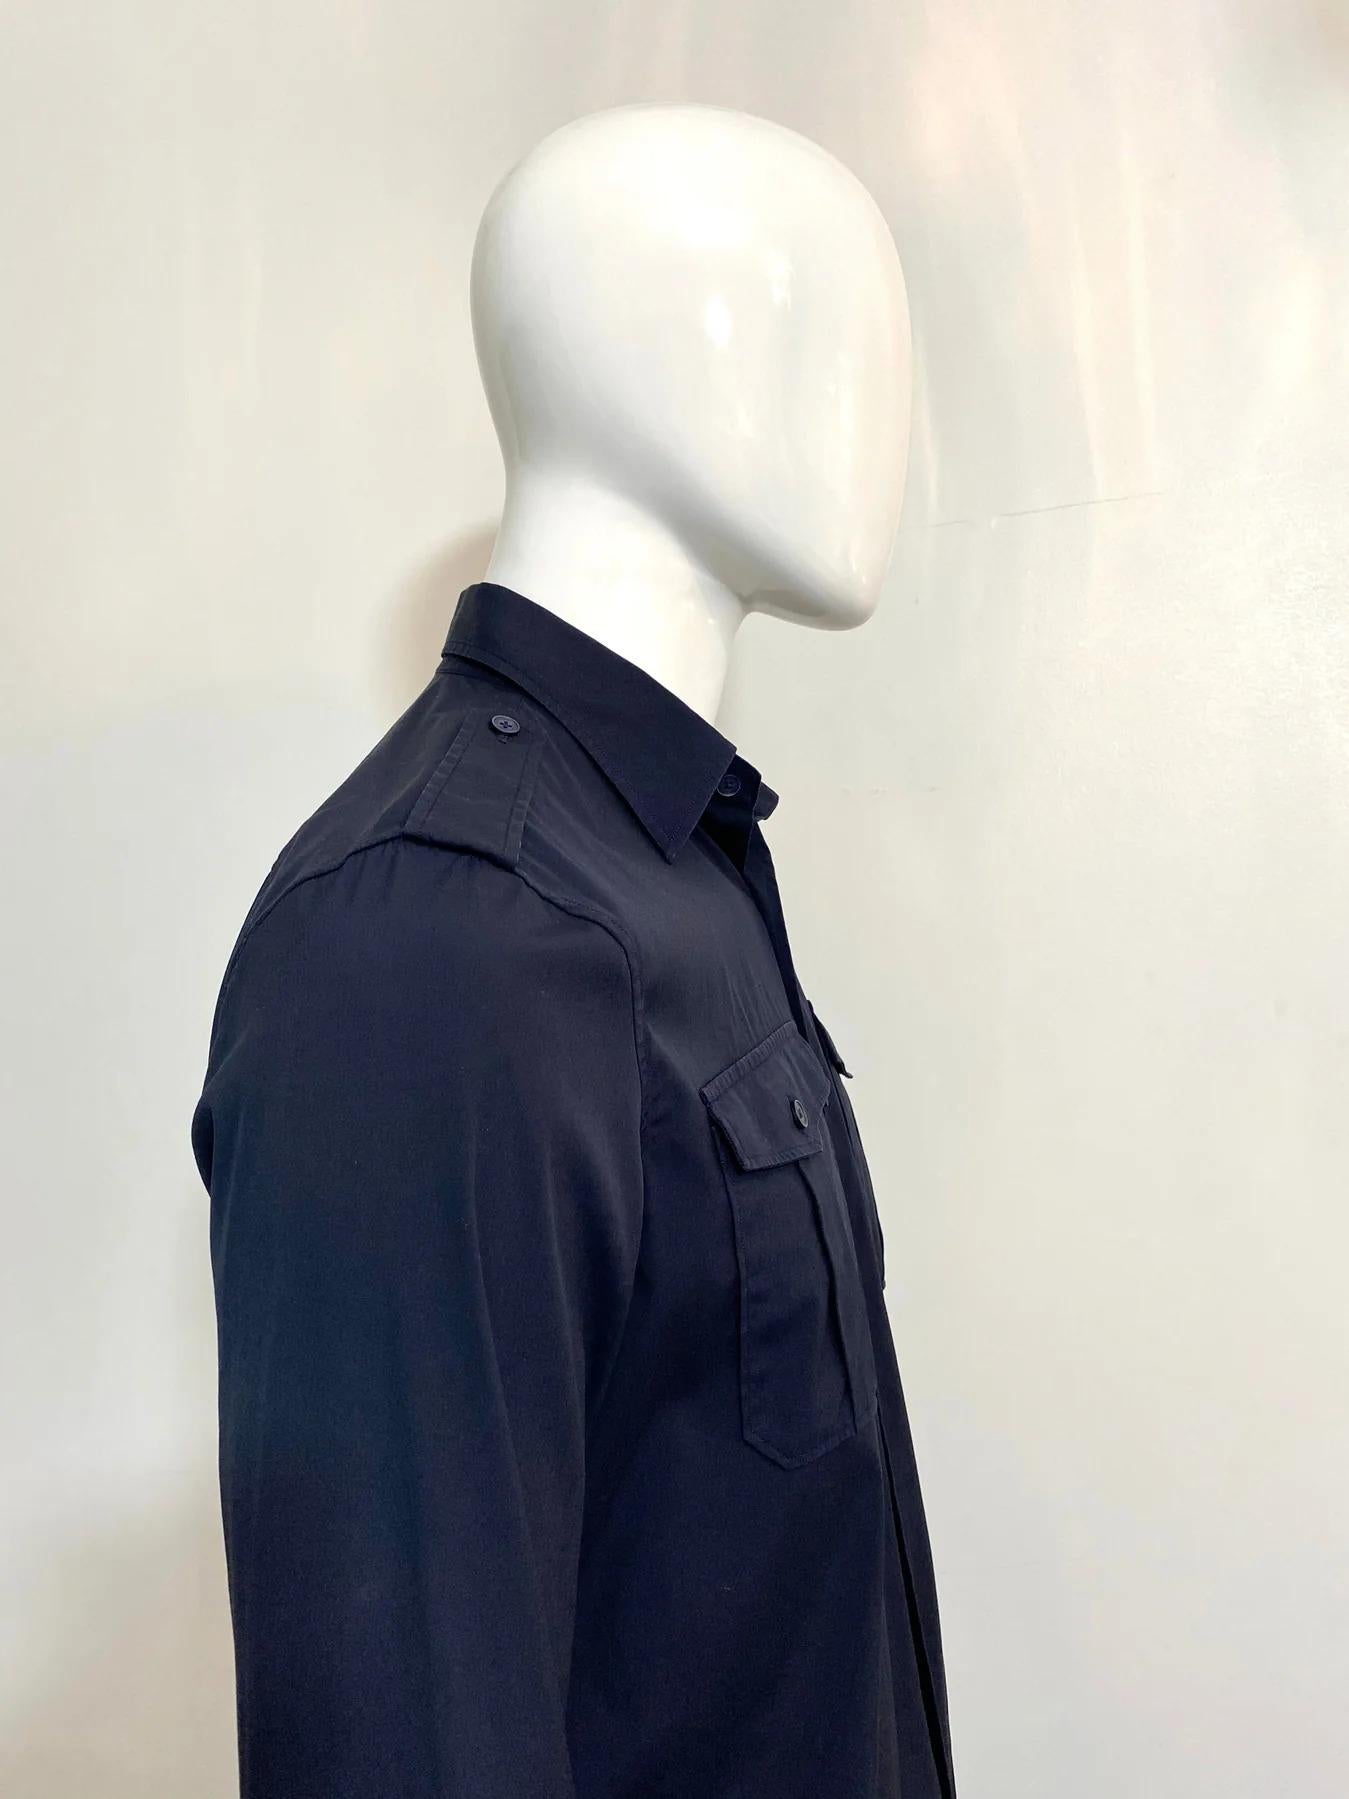 Burberry Prorsum Military Shirt

Navy blue cotton with epaulettes at the shoulders. Chest button closure flap pockets. Button closure and cuffs with signature buttons. No composition label but corresponds to cotton.

Additional information:
Size –